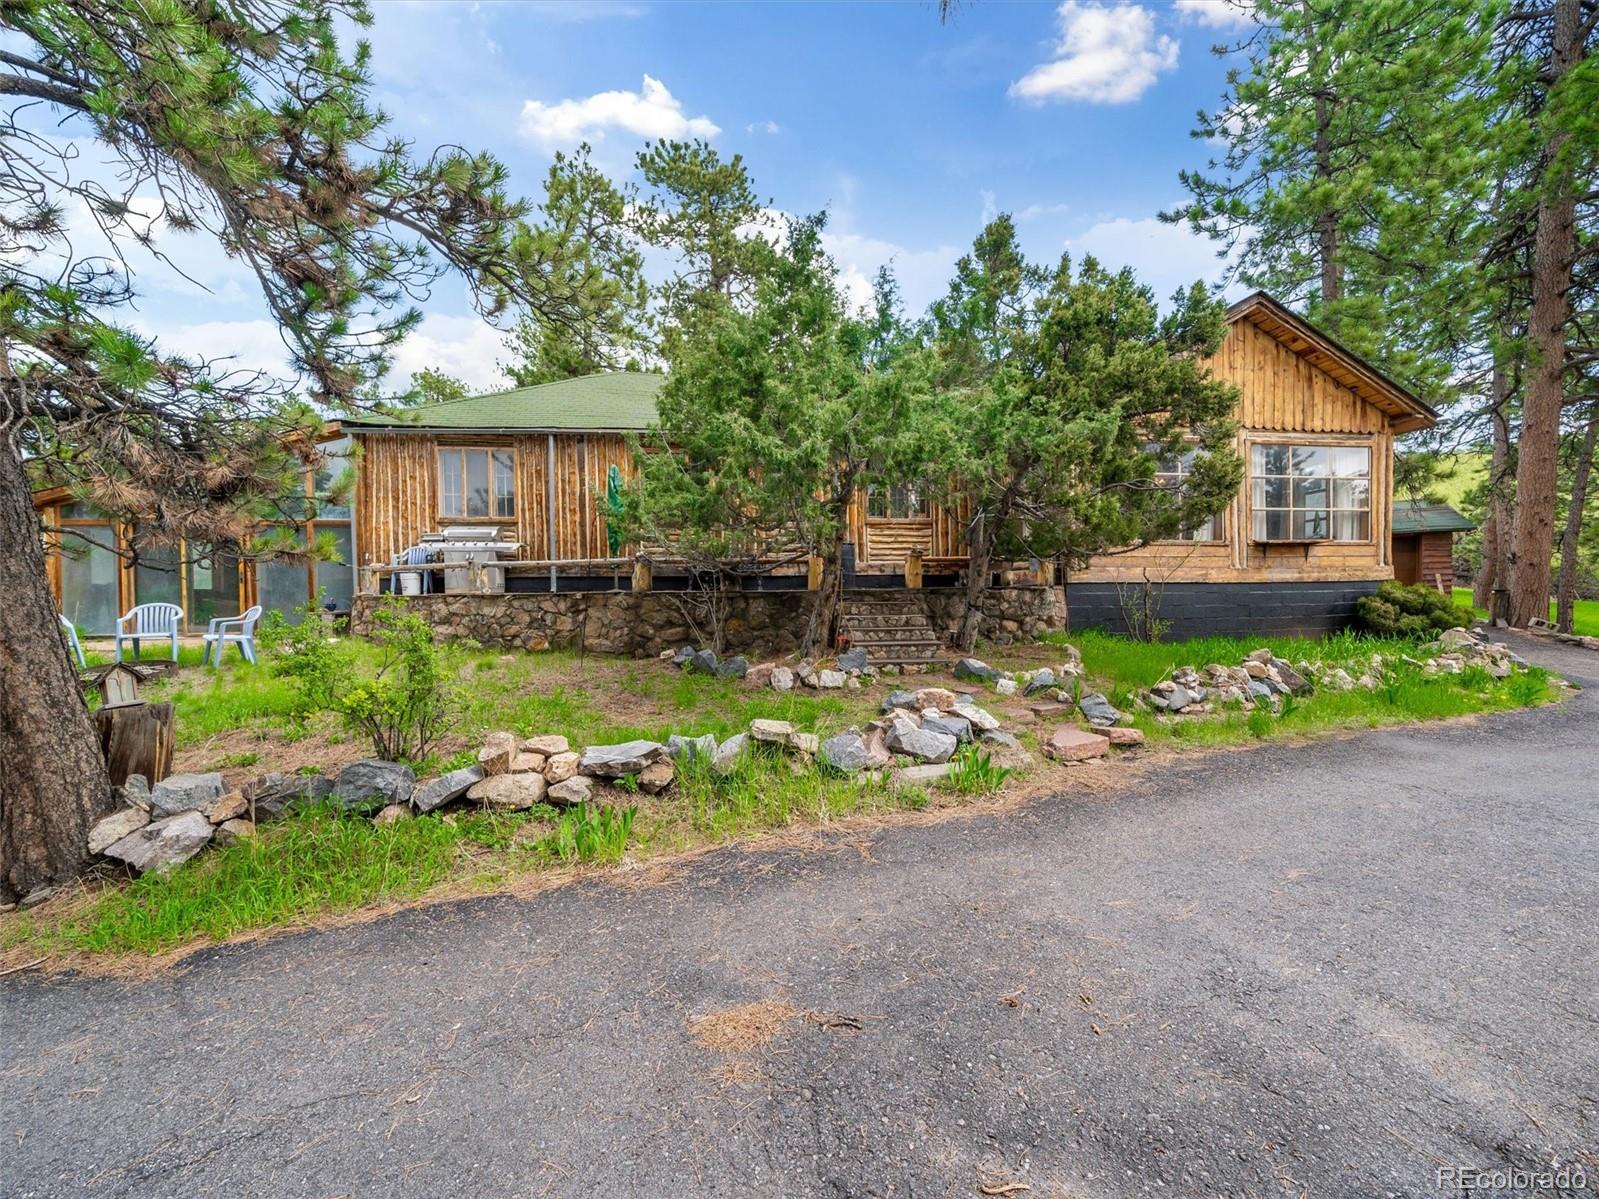 CMA Image for 22858  pawnee road,Indian Hills, Colorado